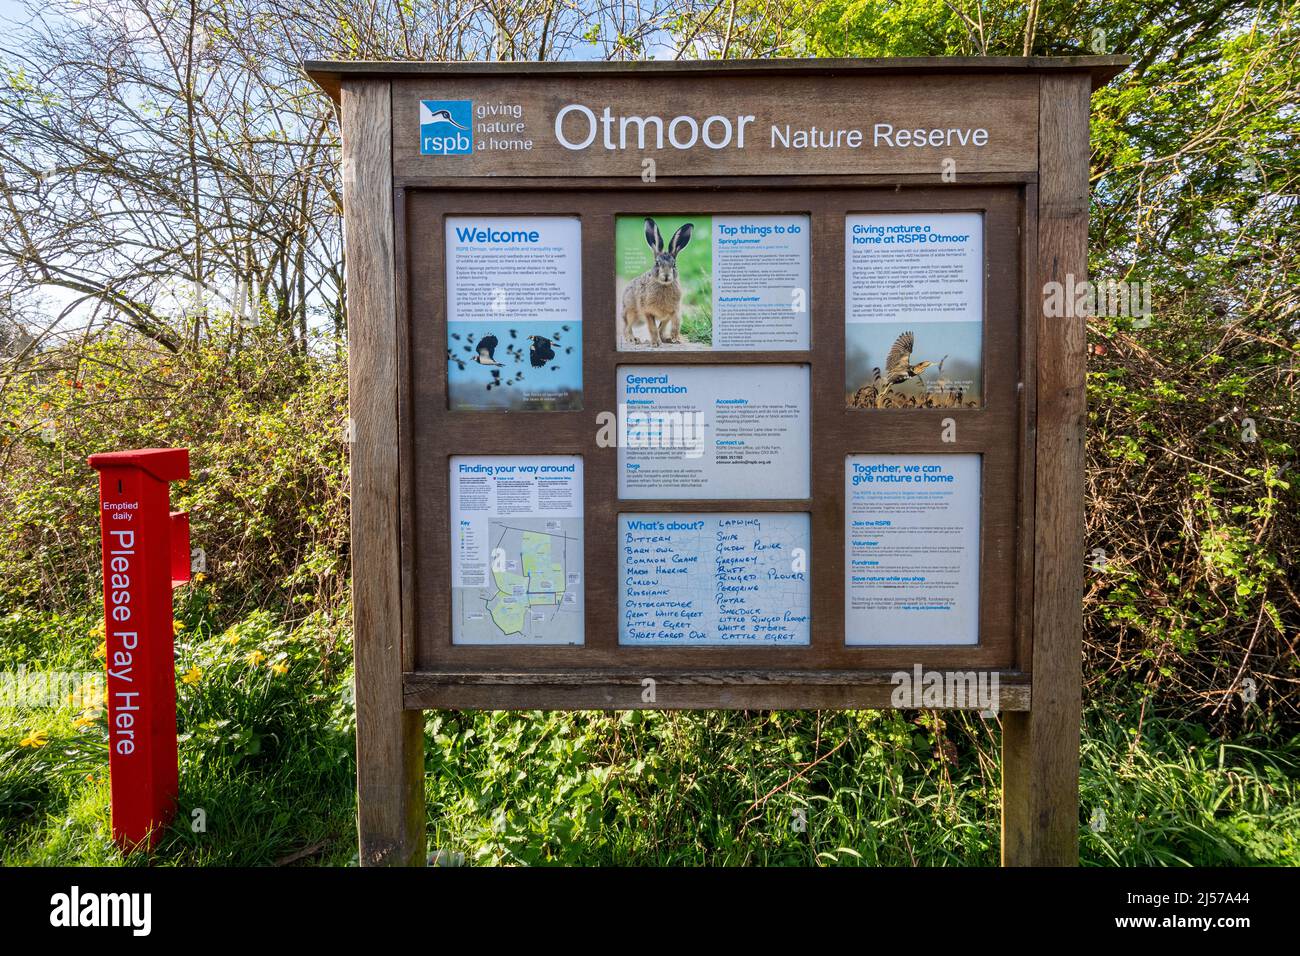 RSPB Otmoor Nature Reserve sign or information board, Oxfordshire, England, UK Stock Photo